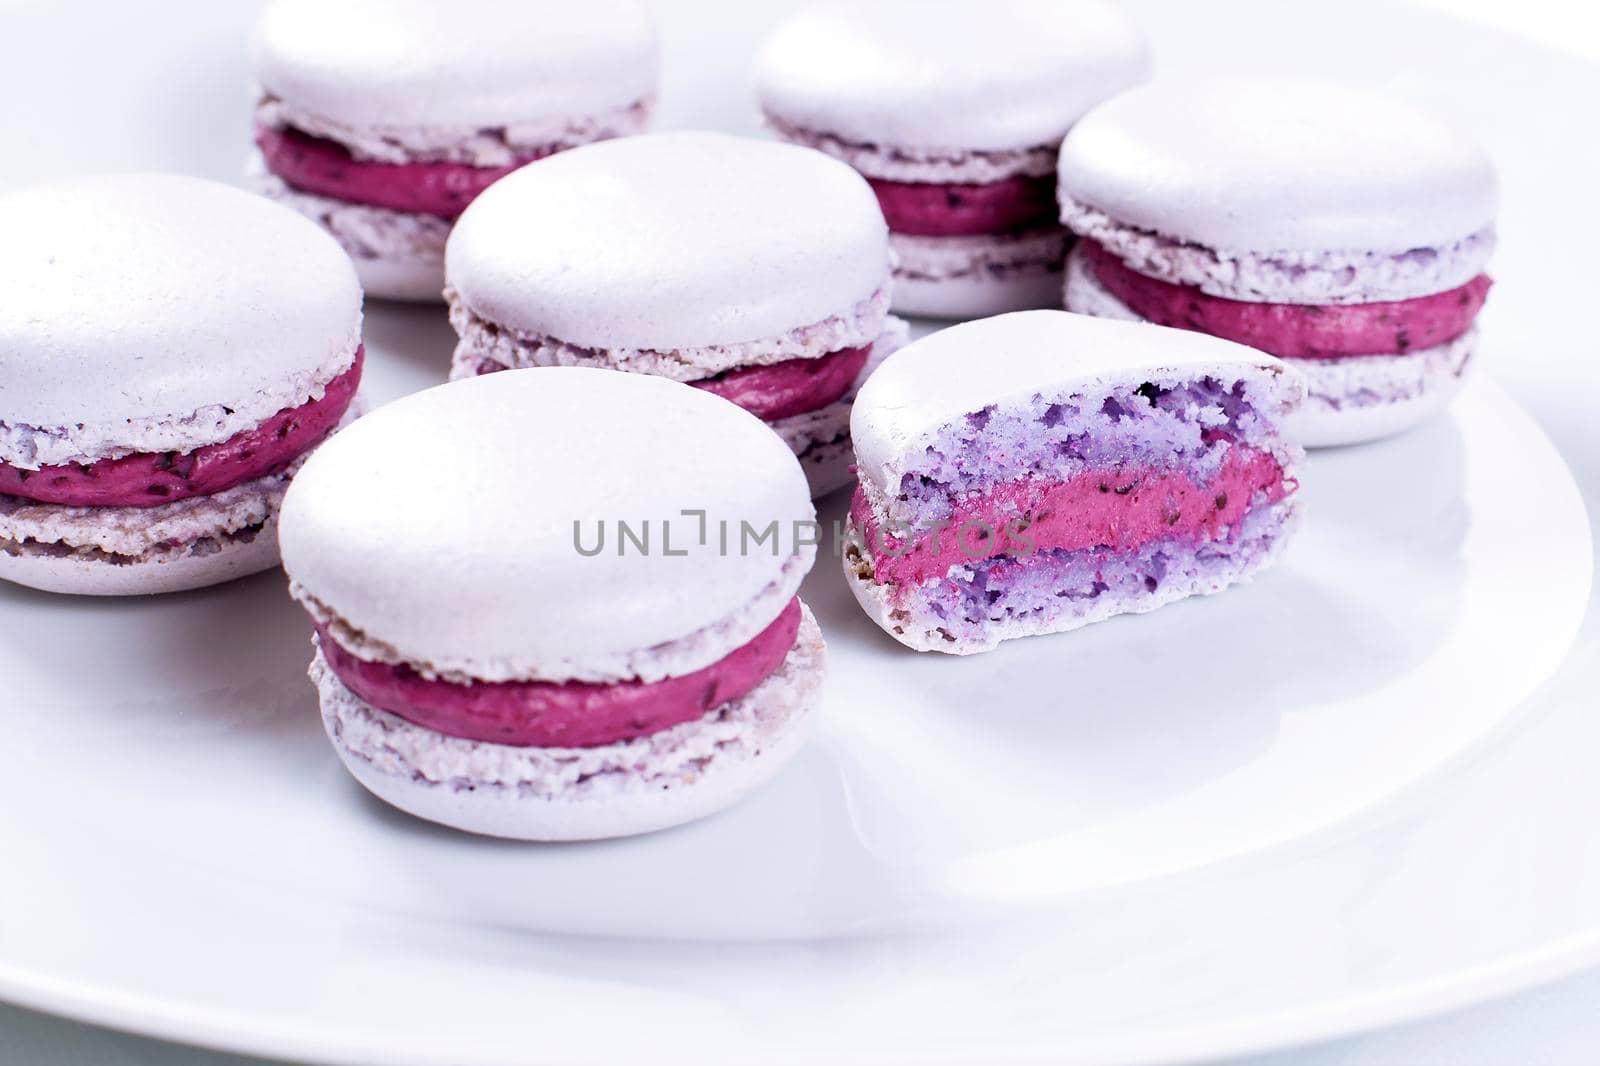 French Macarons with cranberries on blue napkin - Stock image